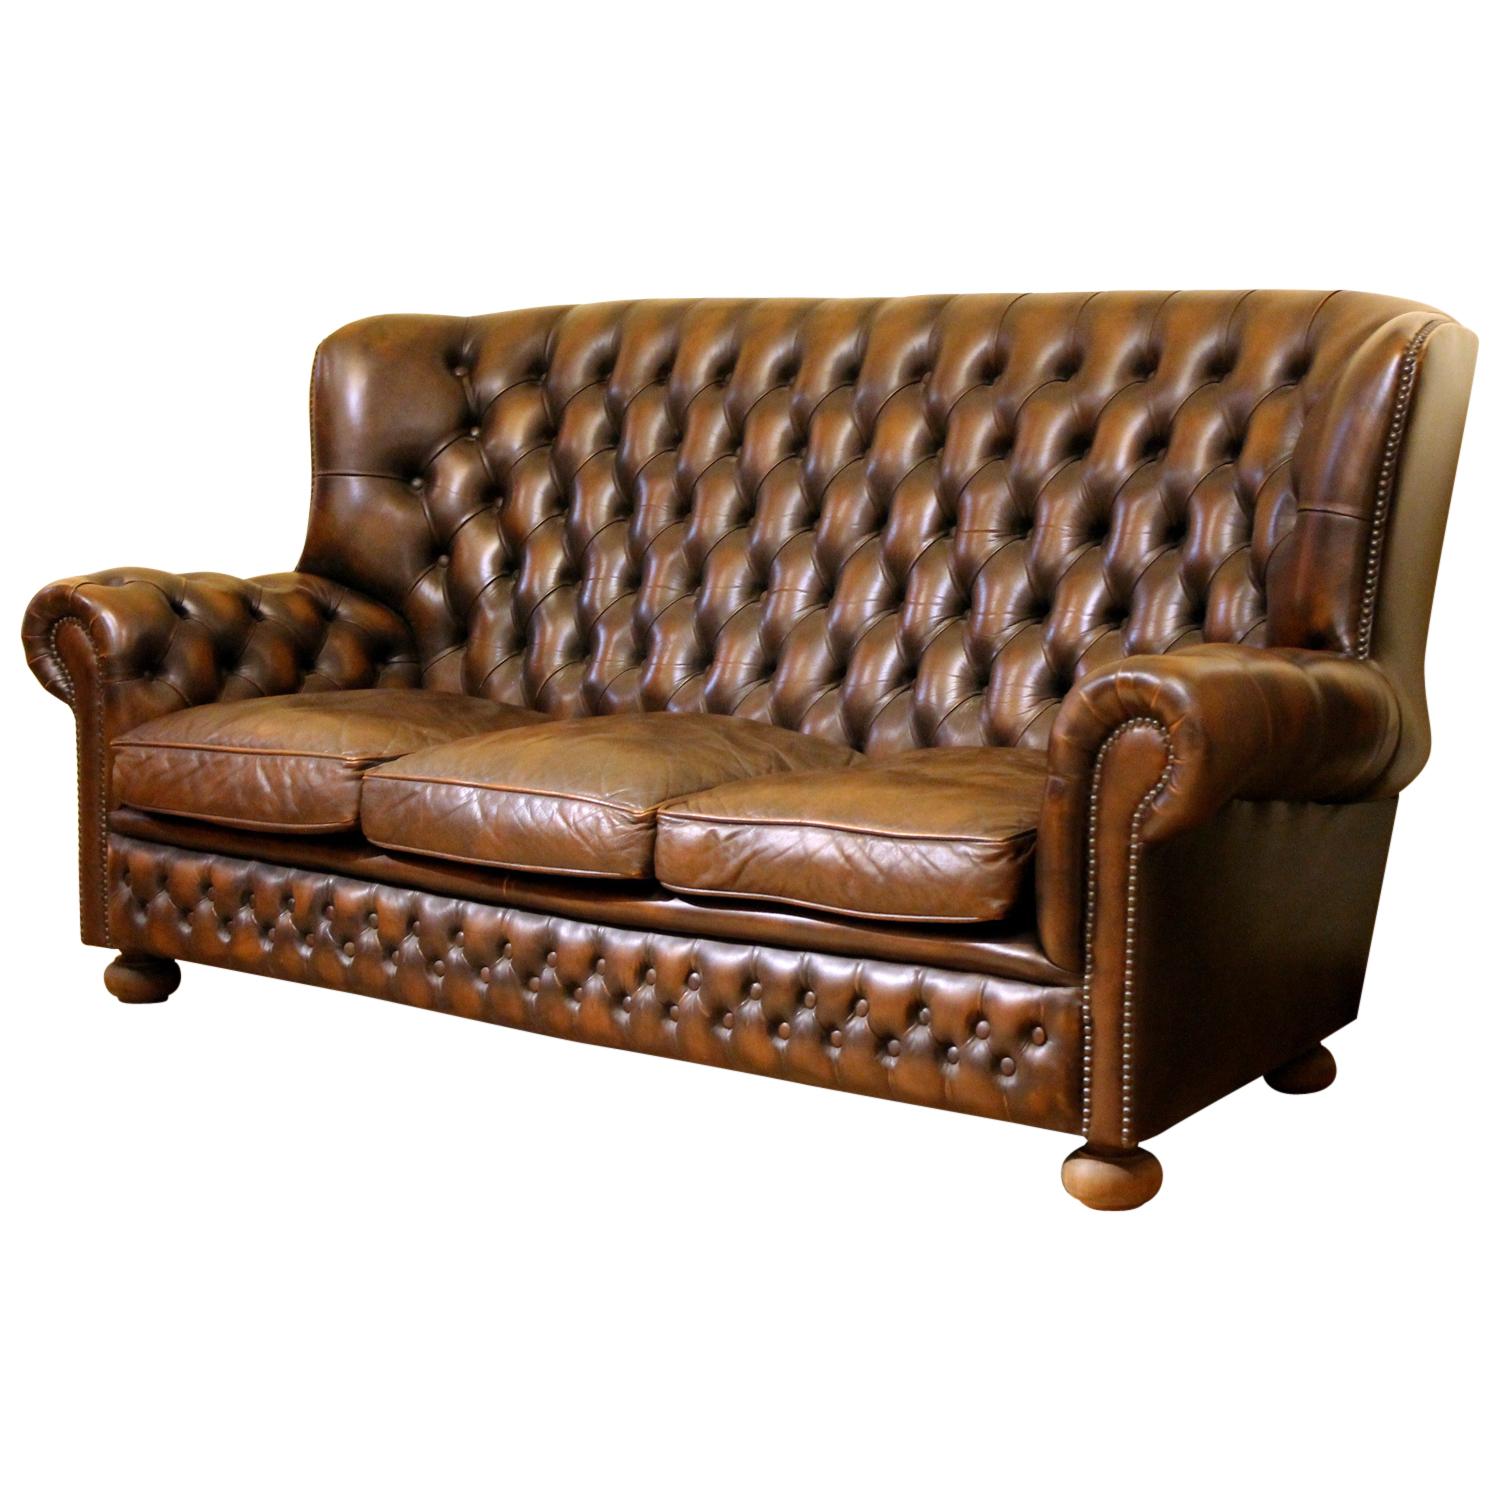 Vintage Chesterfield Sofa Brown Leather High Back Three Seats and Button Tufted